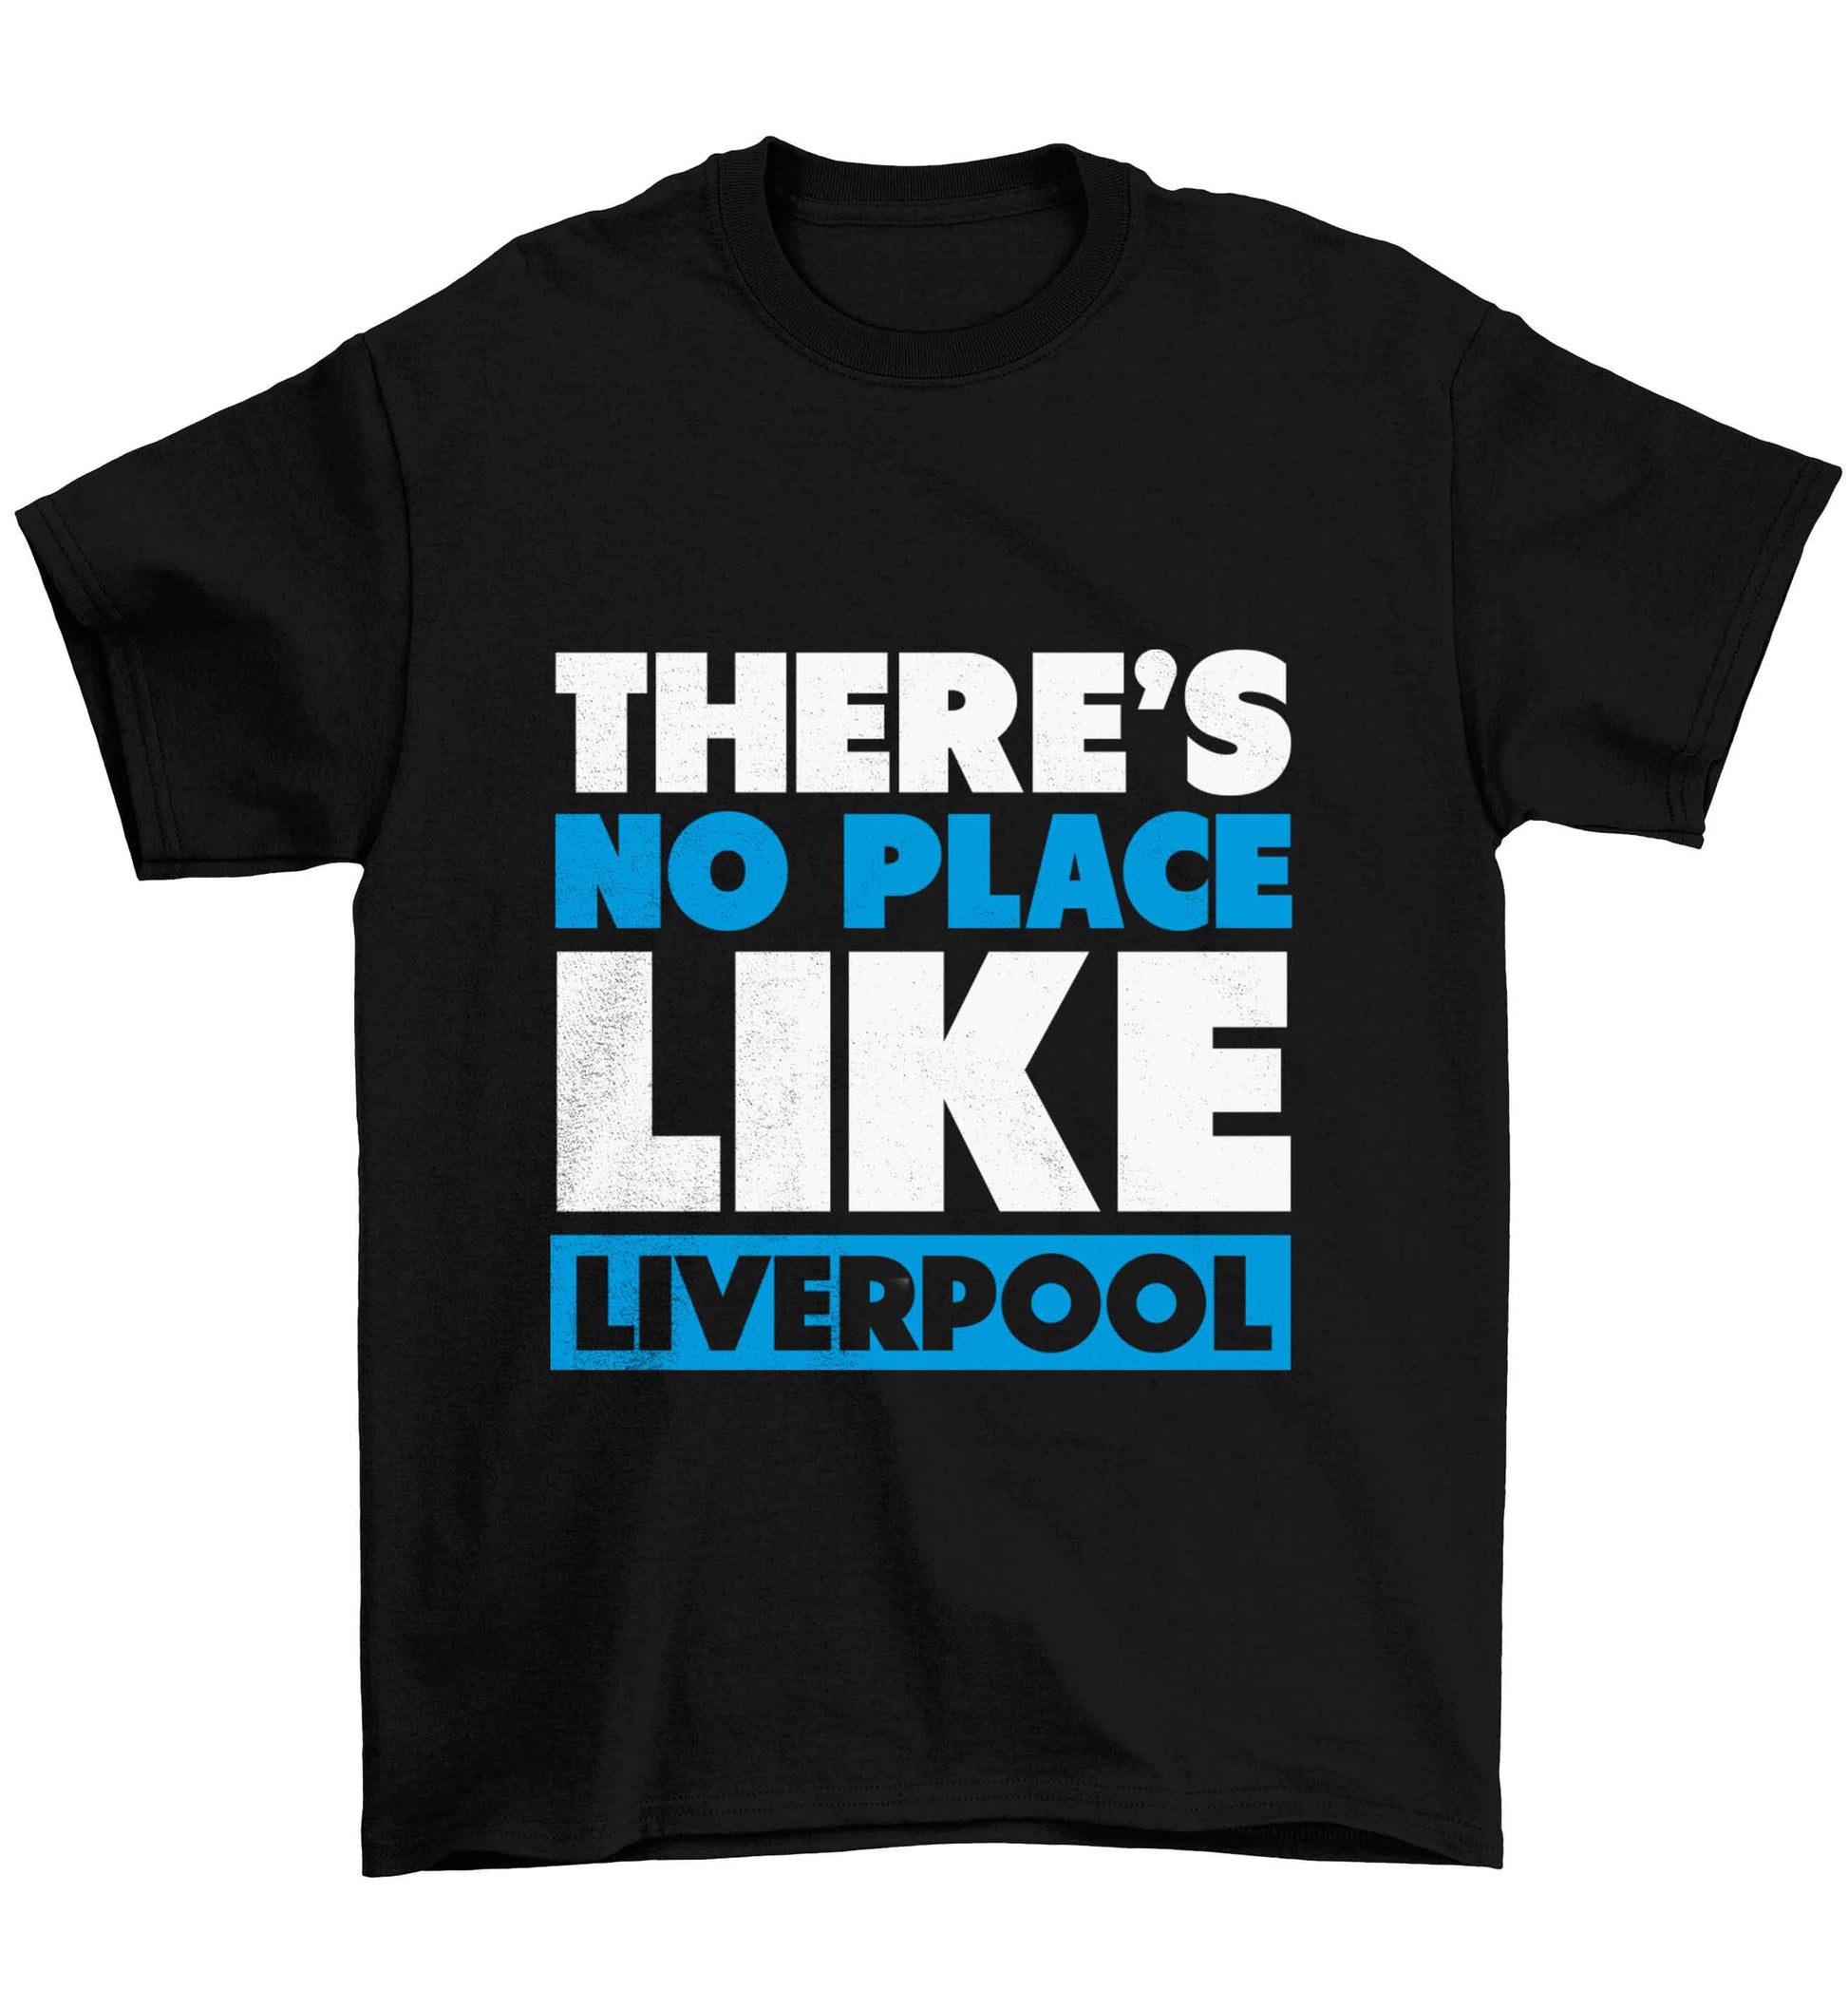 There's no place like Liverpool Children's black Tshirt 12-13 Years